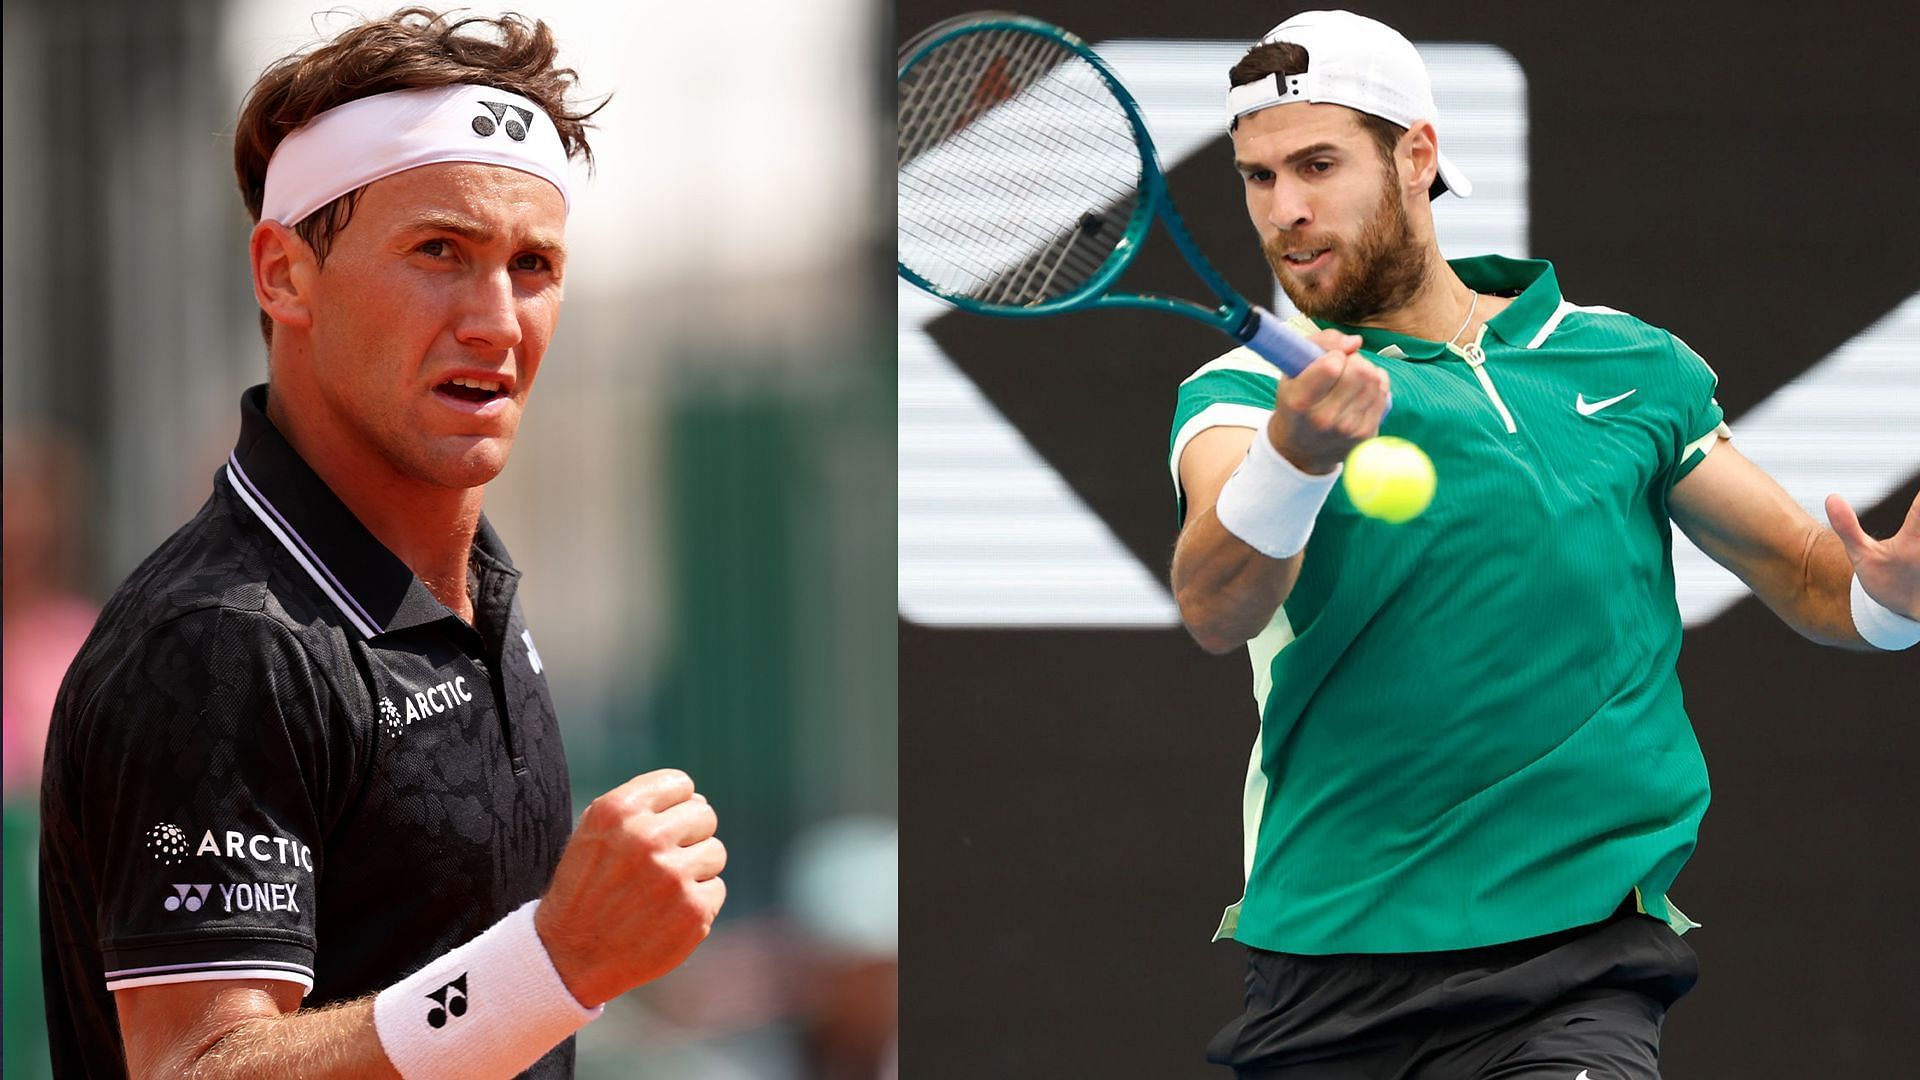 Casper Ruud and Karen Khachanov will be in action at their respective tournaments on Saturday.